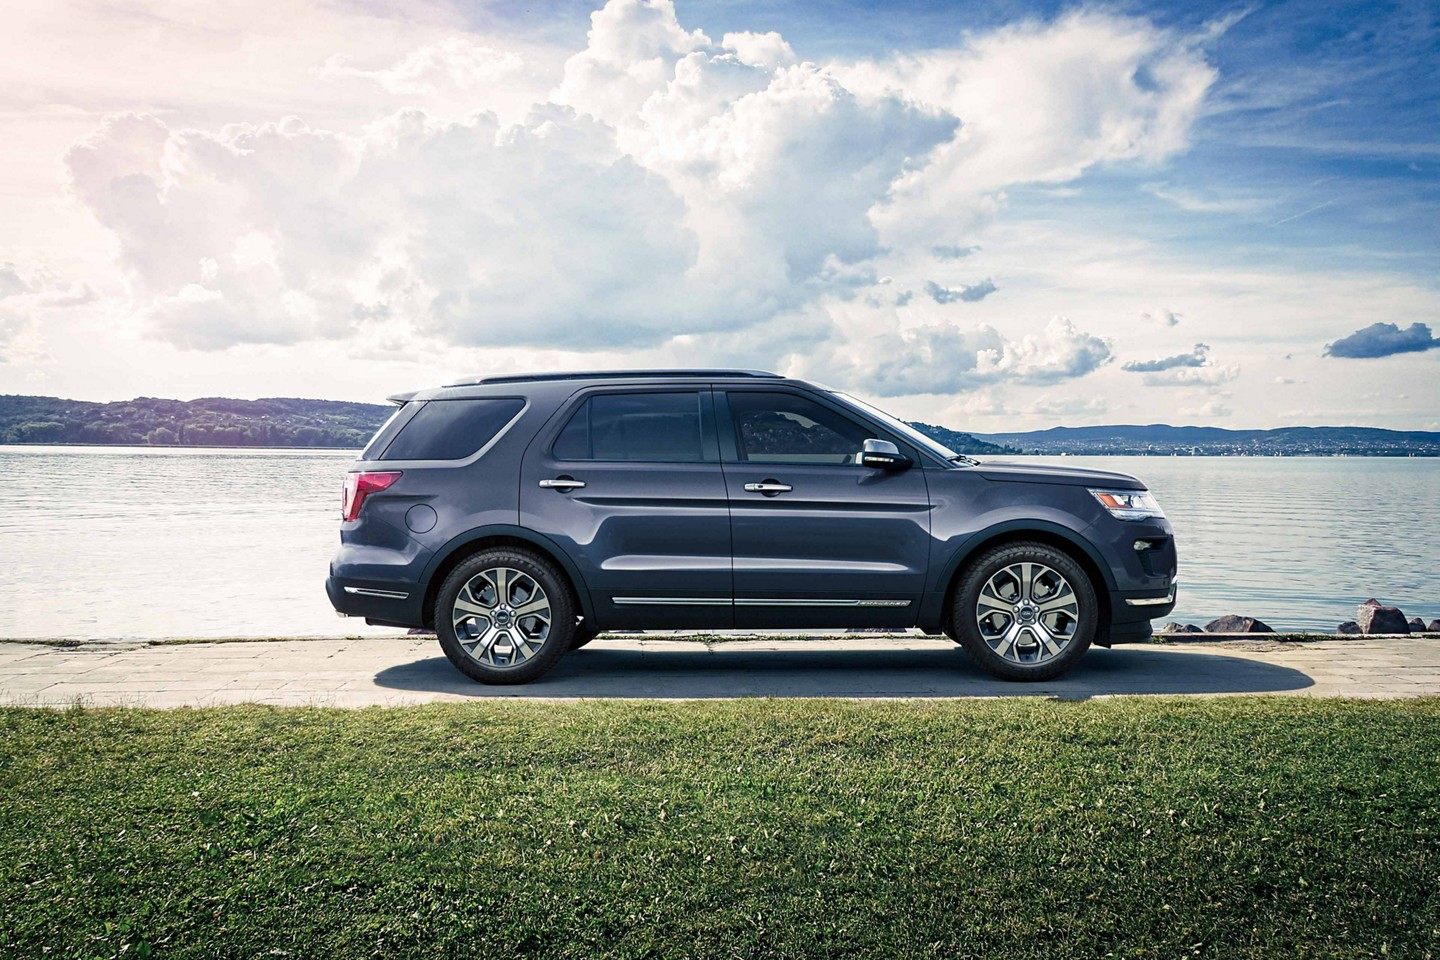 Find a Used Explorer You Love Today!